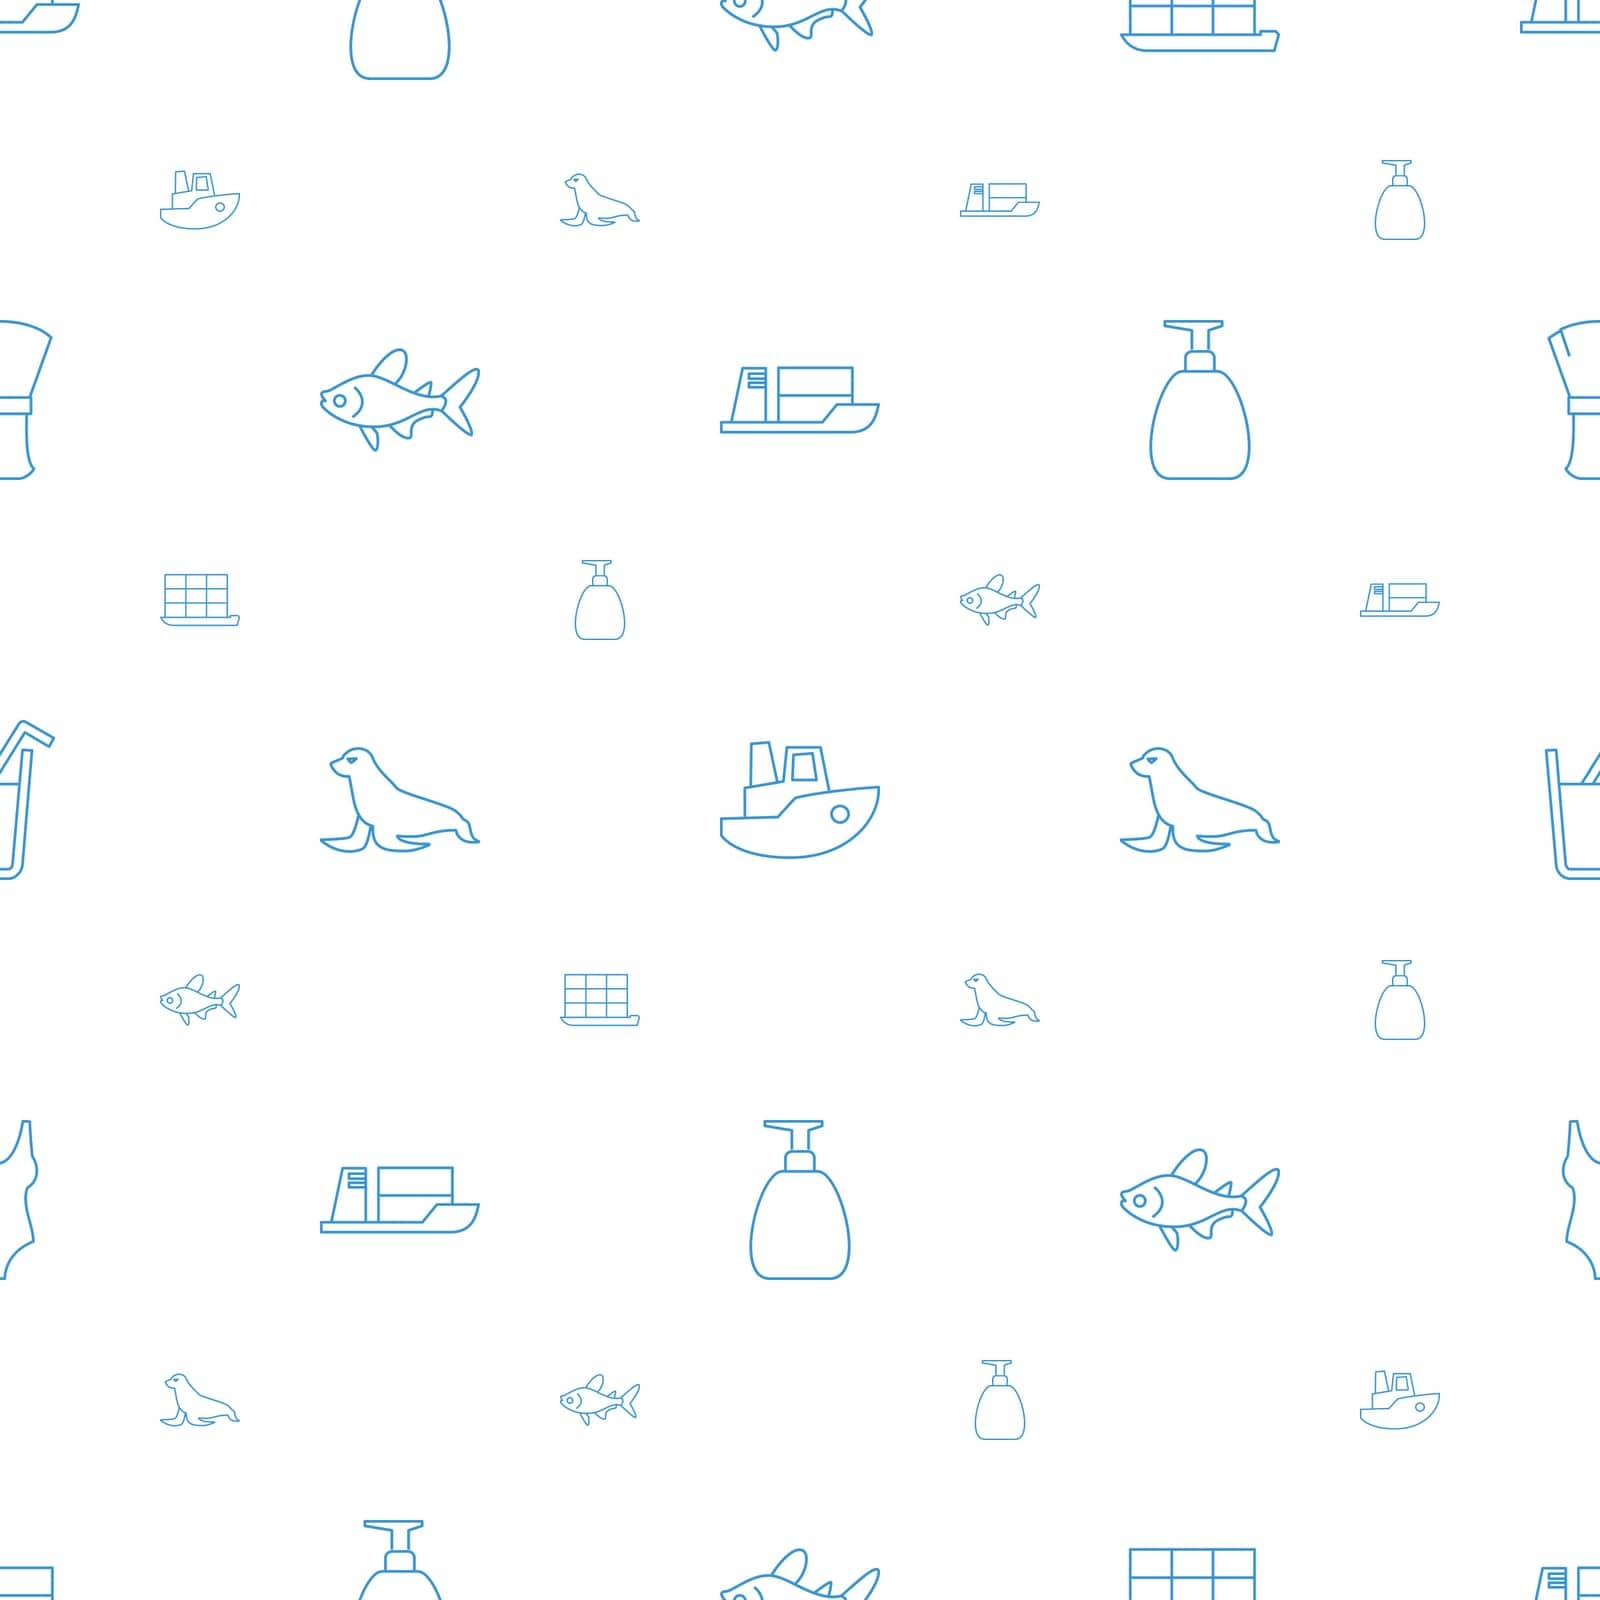 container,symbol,pattern,icon,sign,seal,isolated,ship,holiday,sea,marine,swimming,white,design,vector,cargo,graphic,soft,element,brush,business,black,shaving,water,drink,boat,transportation,plastic,ocean,background,fish,cruise,animal,illustration,suit,travel,swim,soap,object,care